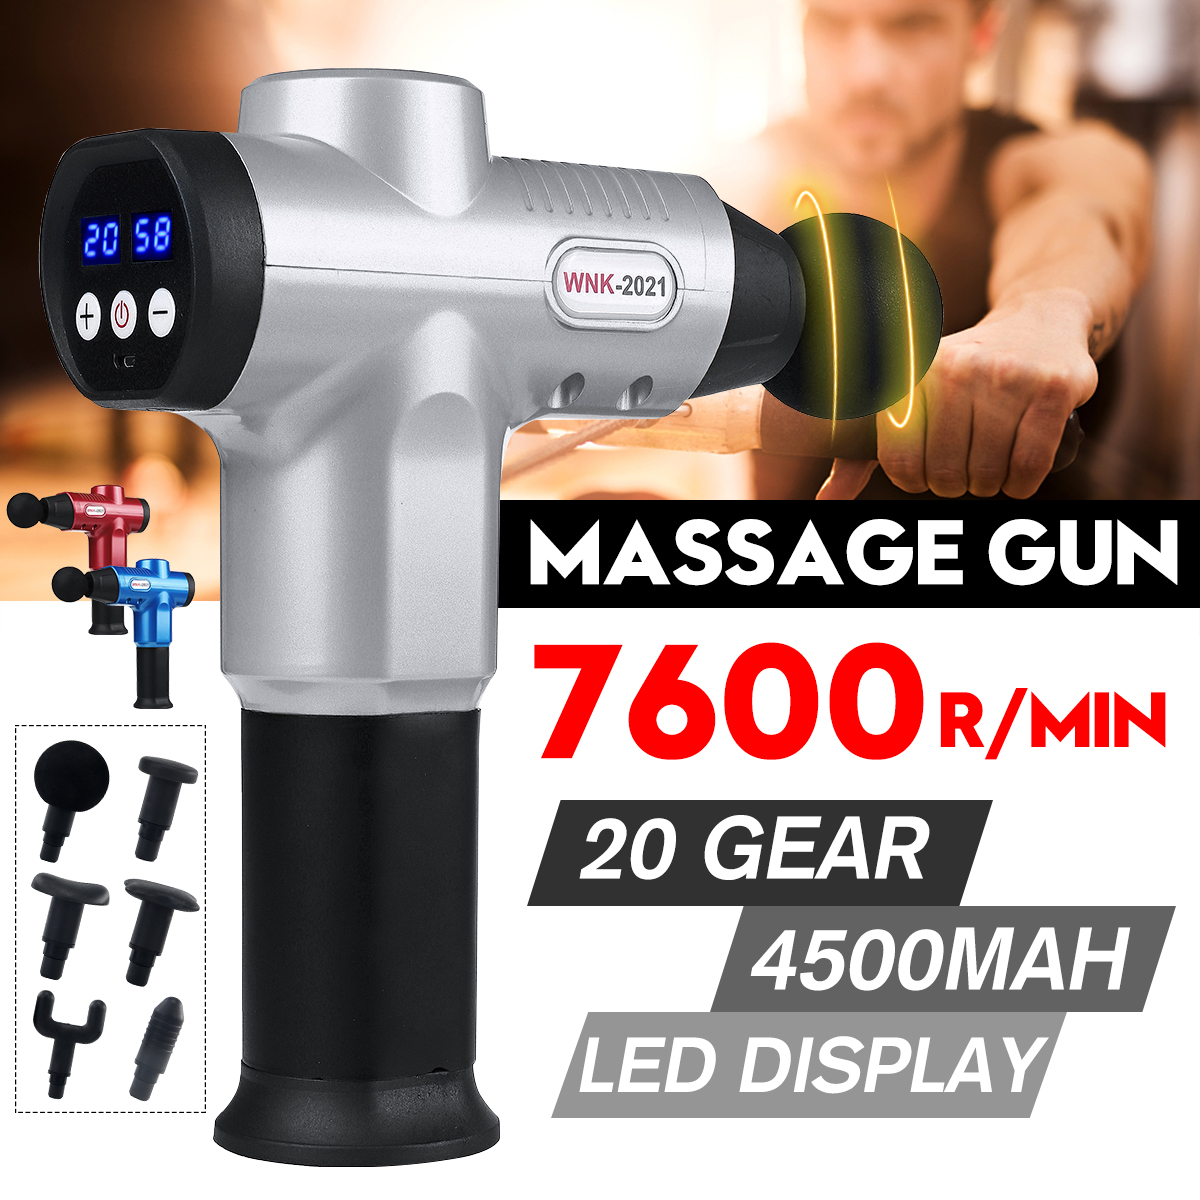 20-Gears-Electric-Percussion-Massager-USB-Rechargeable-Muscle-Vibration-Pain-Relief-Device-W-6-Heads-1725593-1